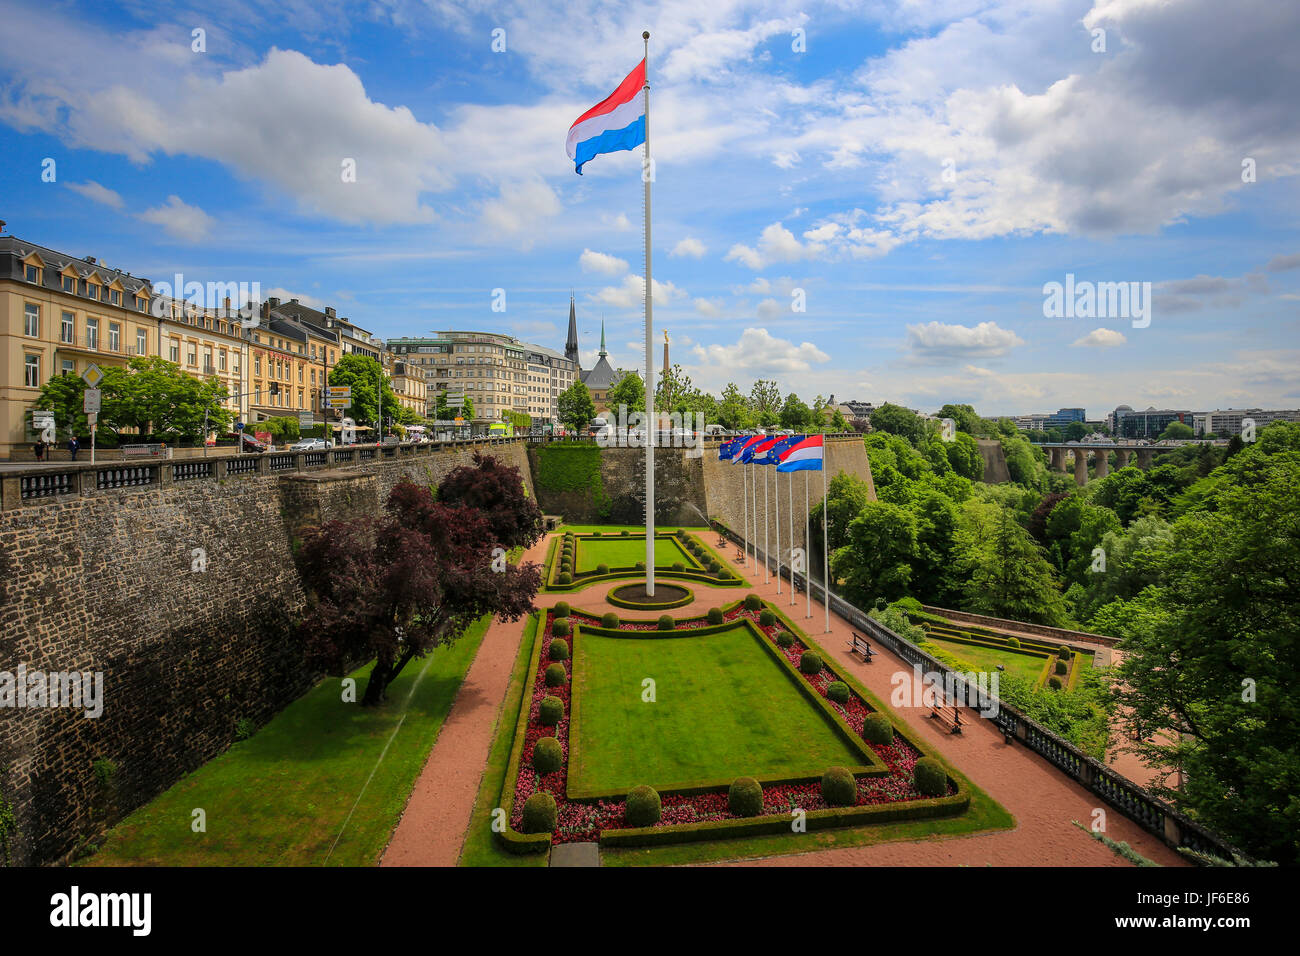 Luxembourg national flag in the Park at the place de la Constitution, Luxembourg City, Grand Duchy of Luxembourg, Europe, Luxemburger Nationalflagge i Stock Photo